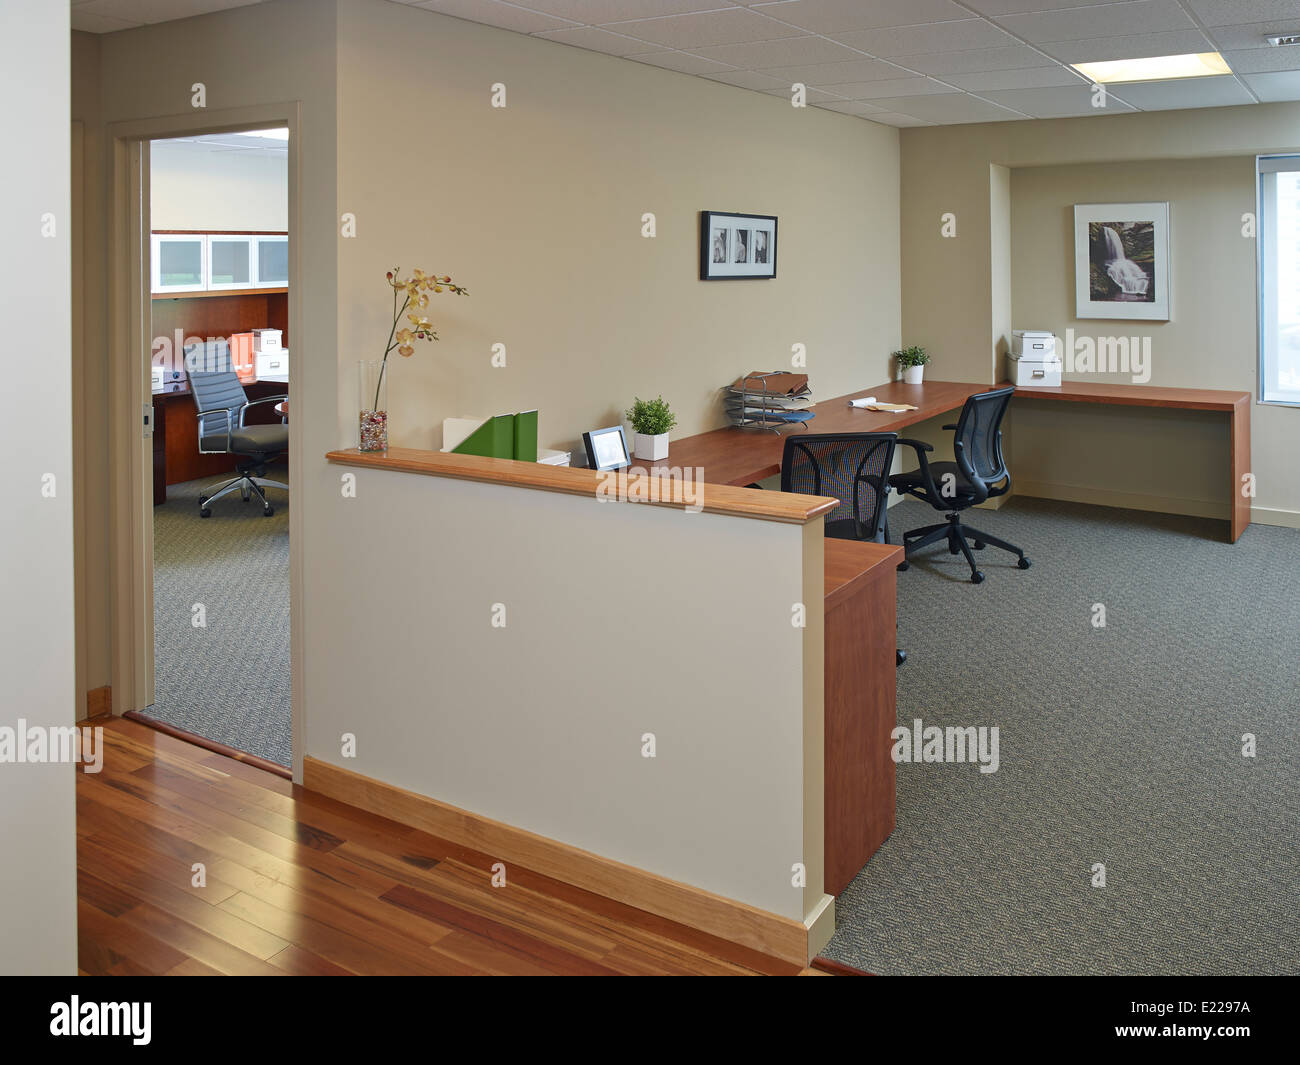 Simple Office With No Employees Stock Photo